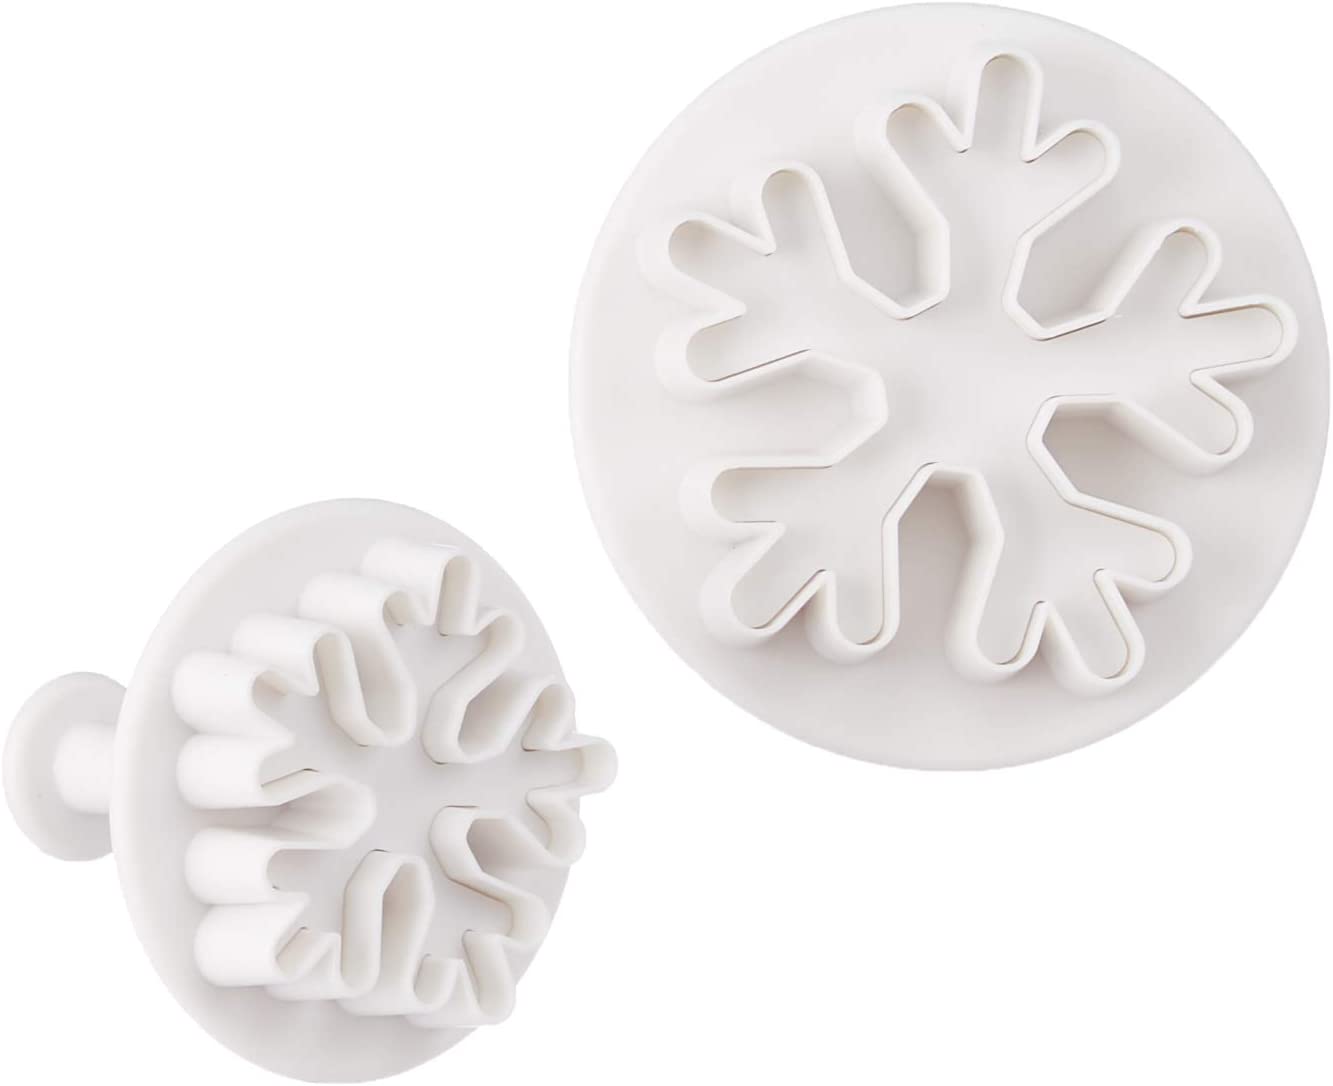 Staedter Städter 170537 Snowflake, Set of 2 with Ejector